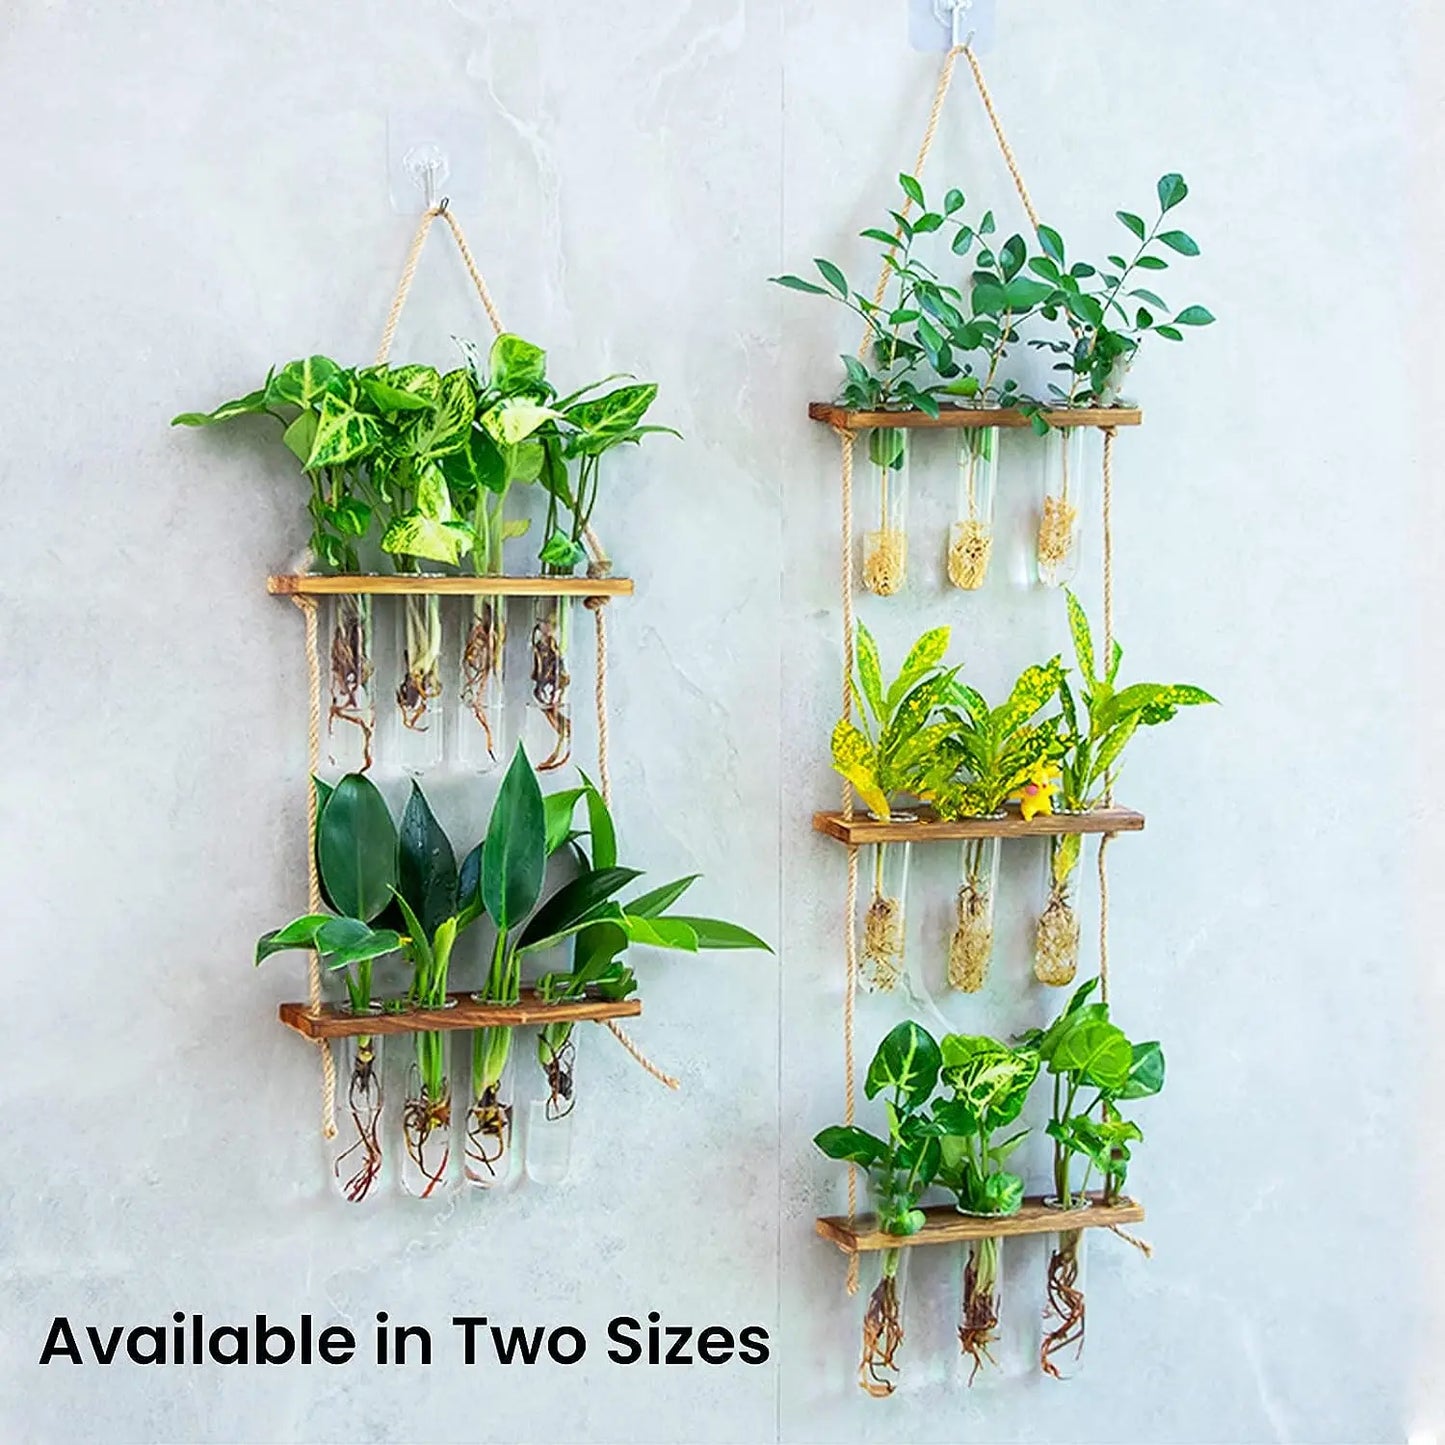 2-Layer Glass Planter Plant Terrarium with Wooden Stand - Wall Hanging Test Tube Vase